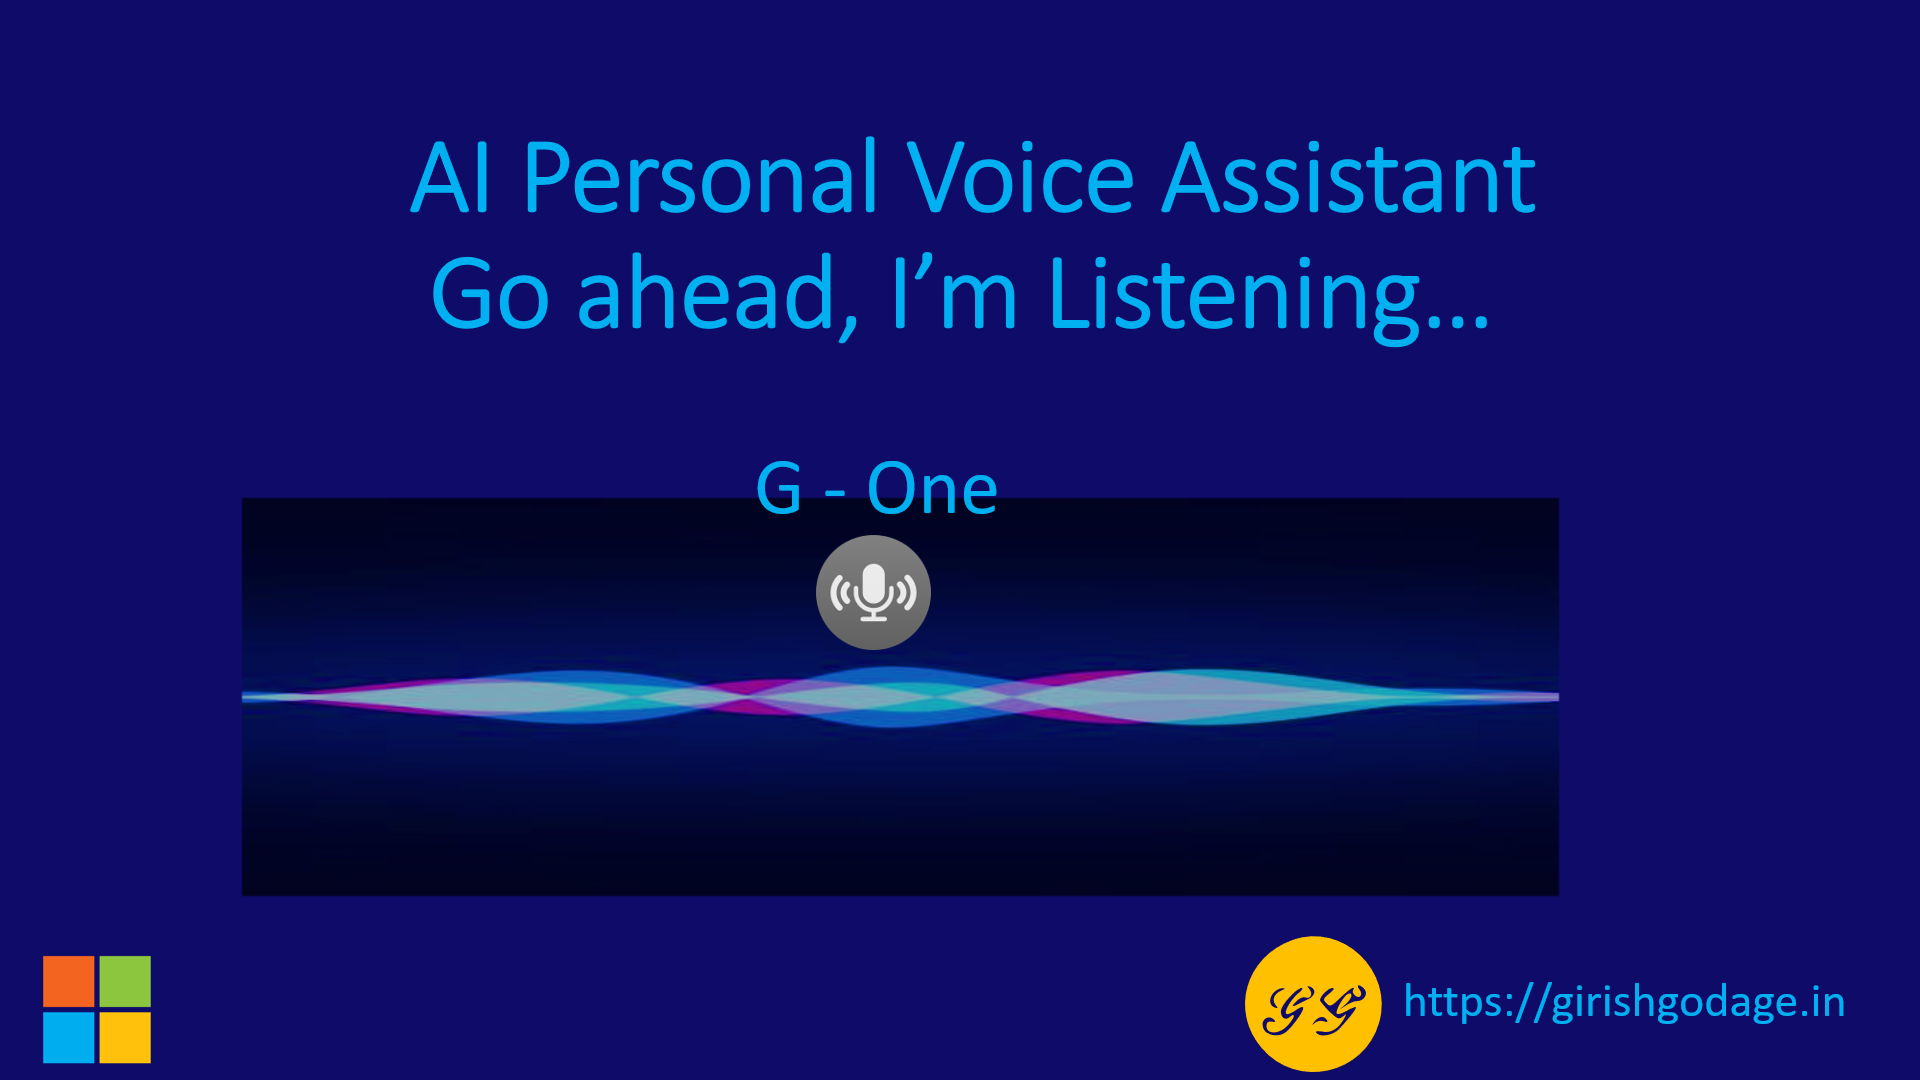 How to build your own AI personal assistant using Python